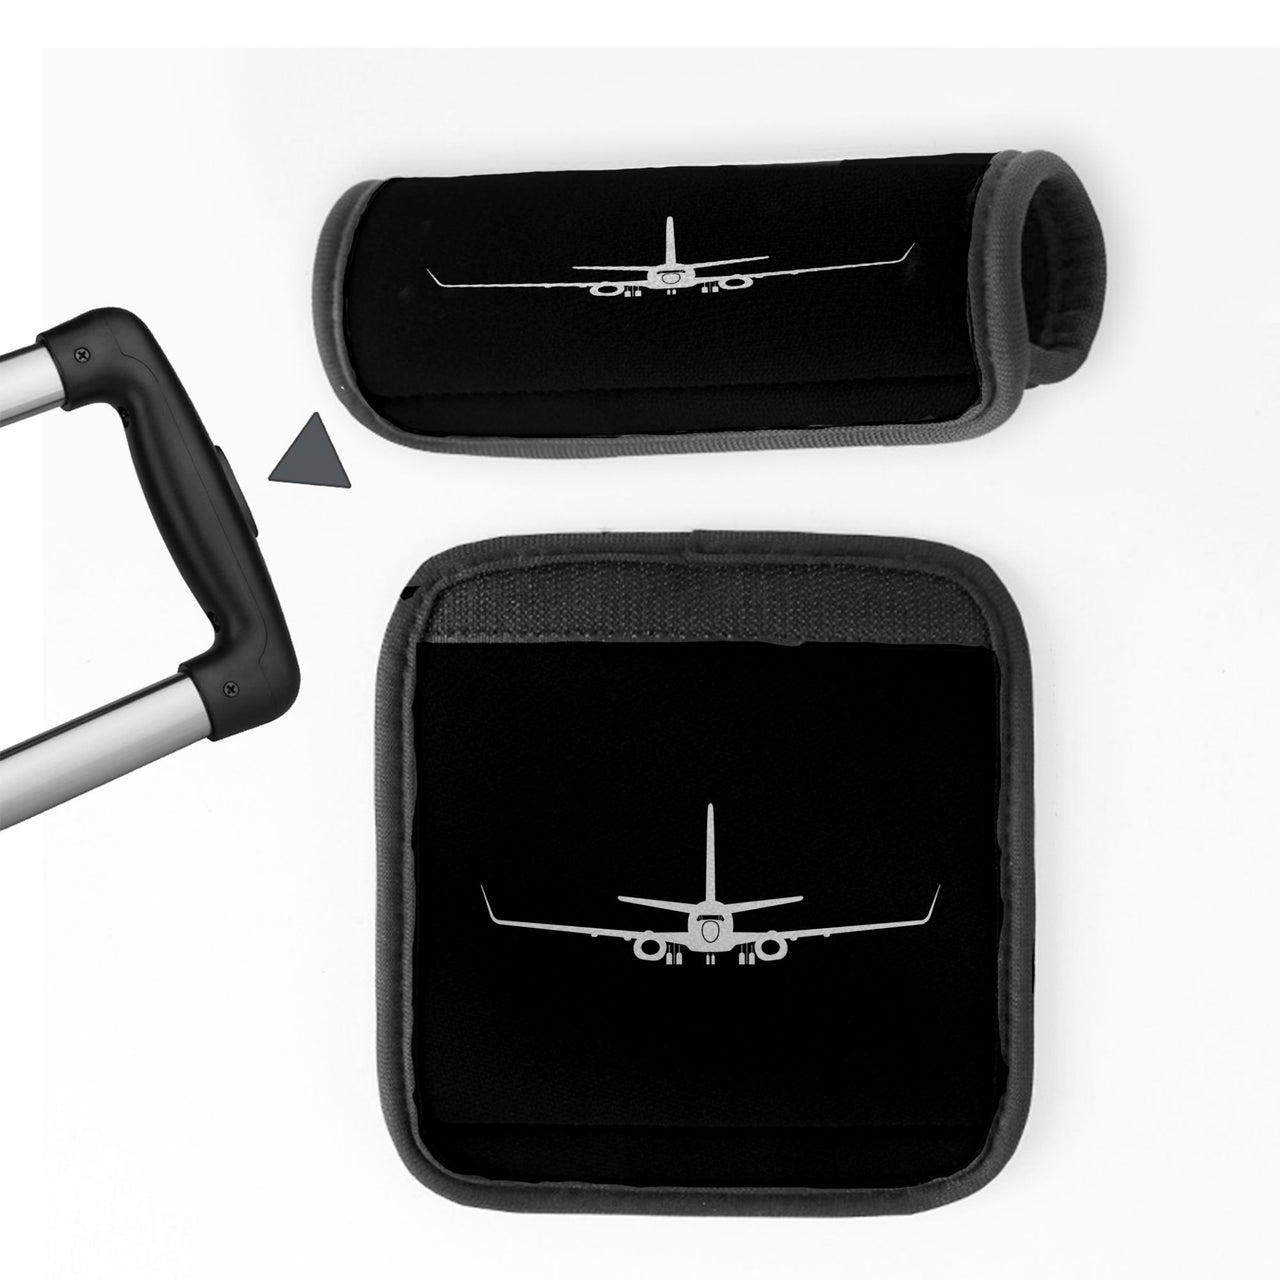 Boeing 737-800NG Silhouette Designed Neoprene Luggage Handle Covers